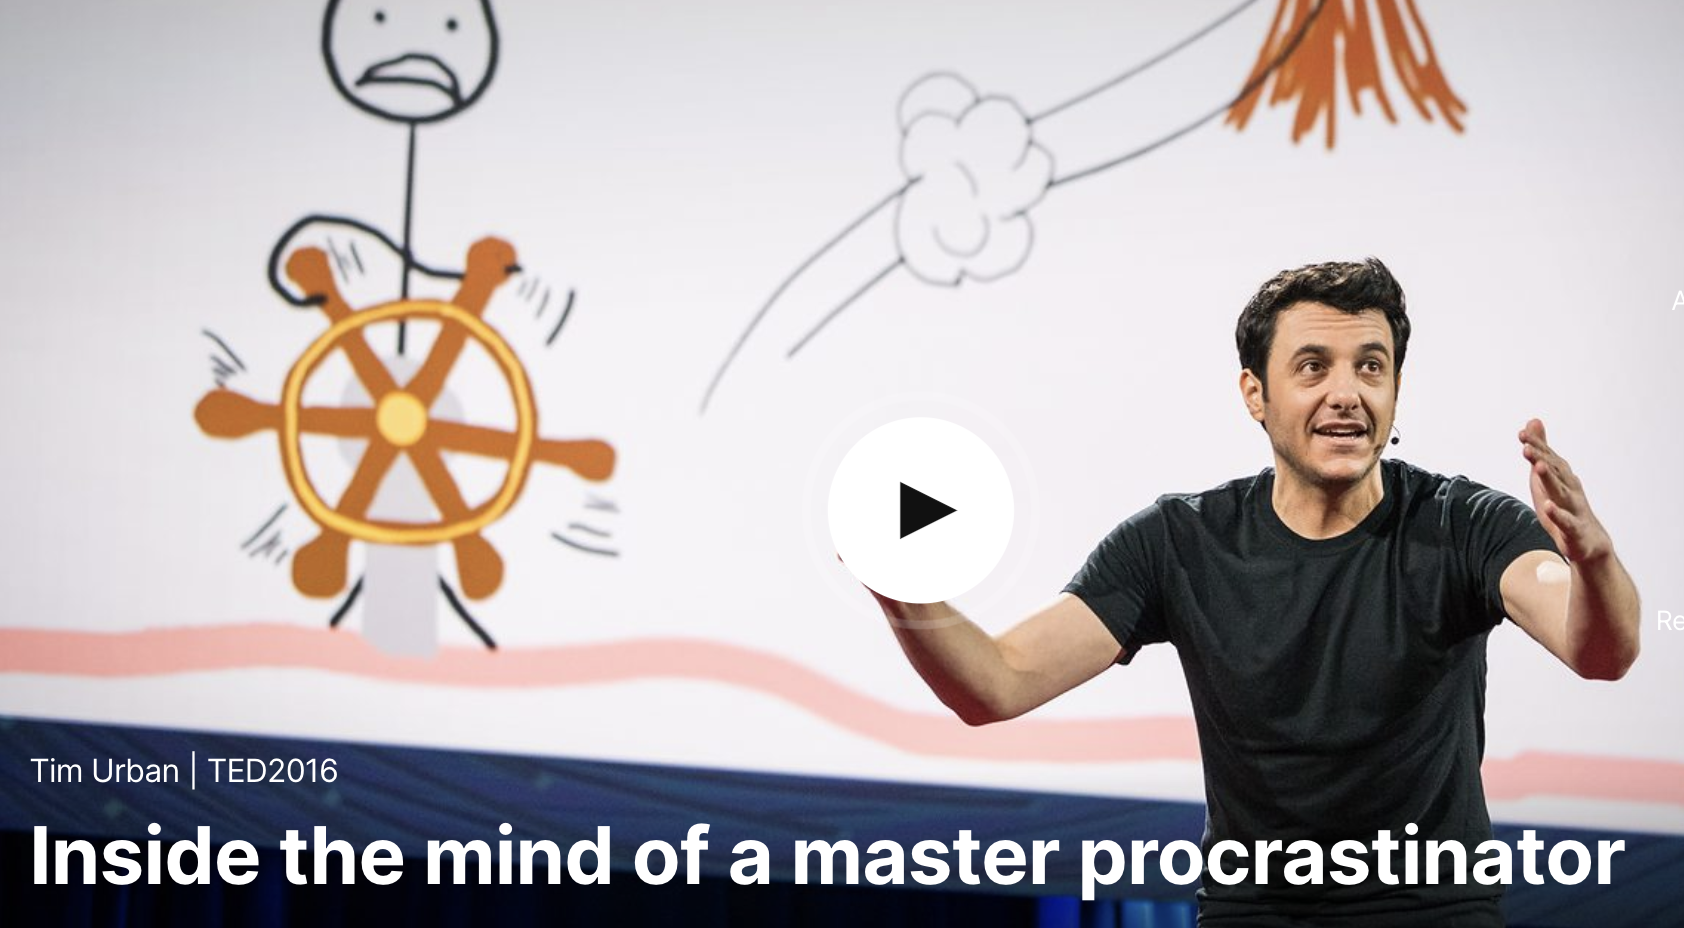 Tim Urban's TED Talk "Inside the Mind of a Master Procrastinator" ends with a powerful, but subtle, call to action.